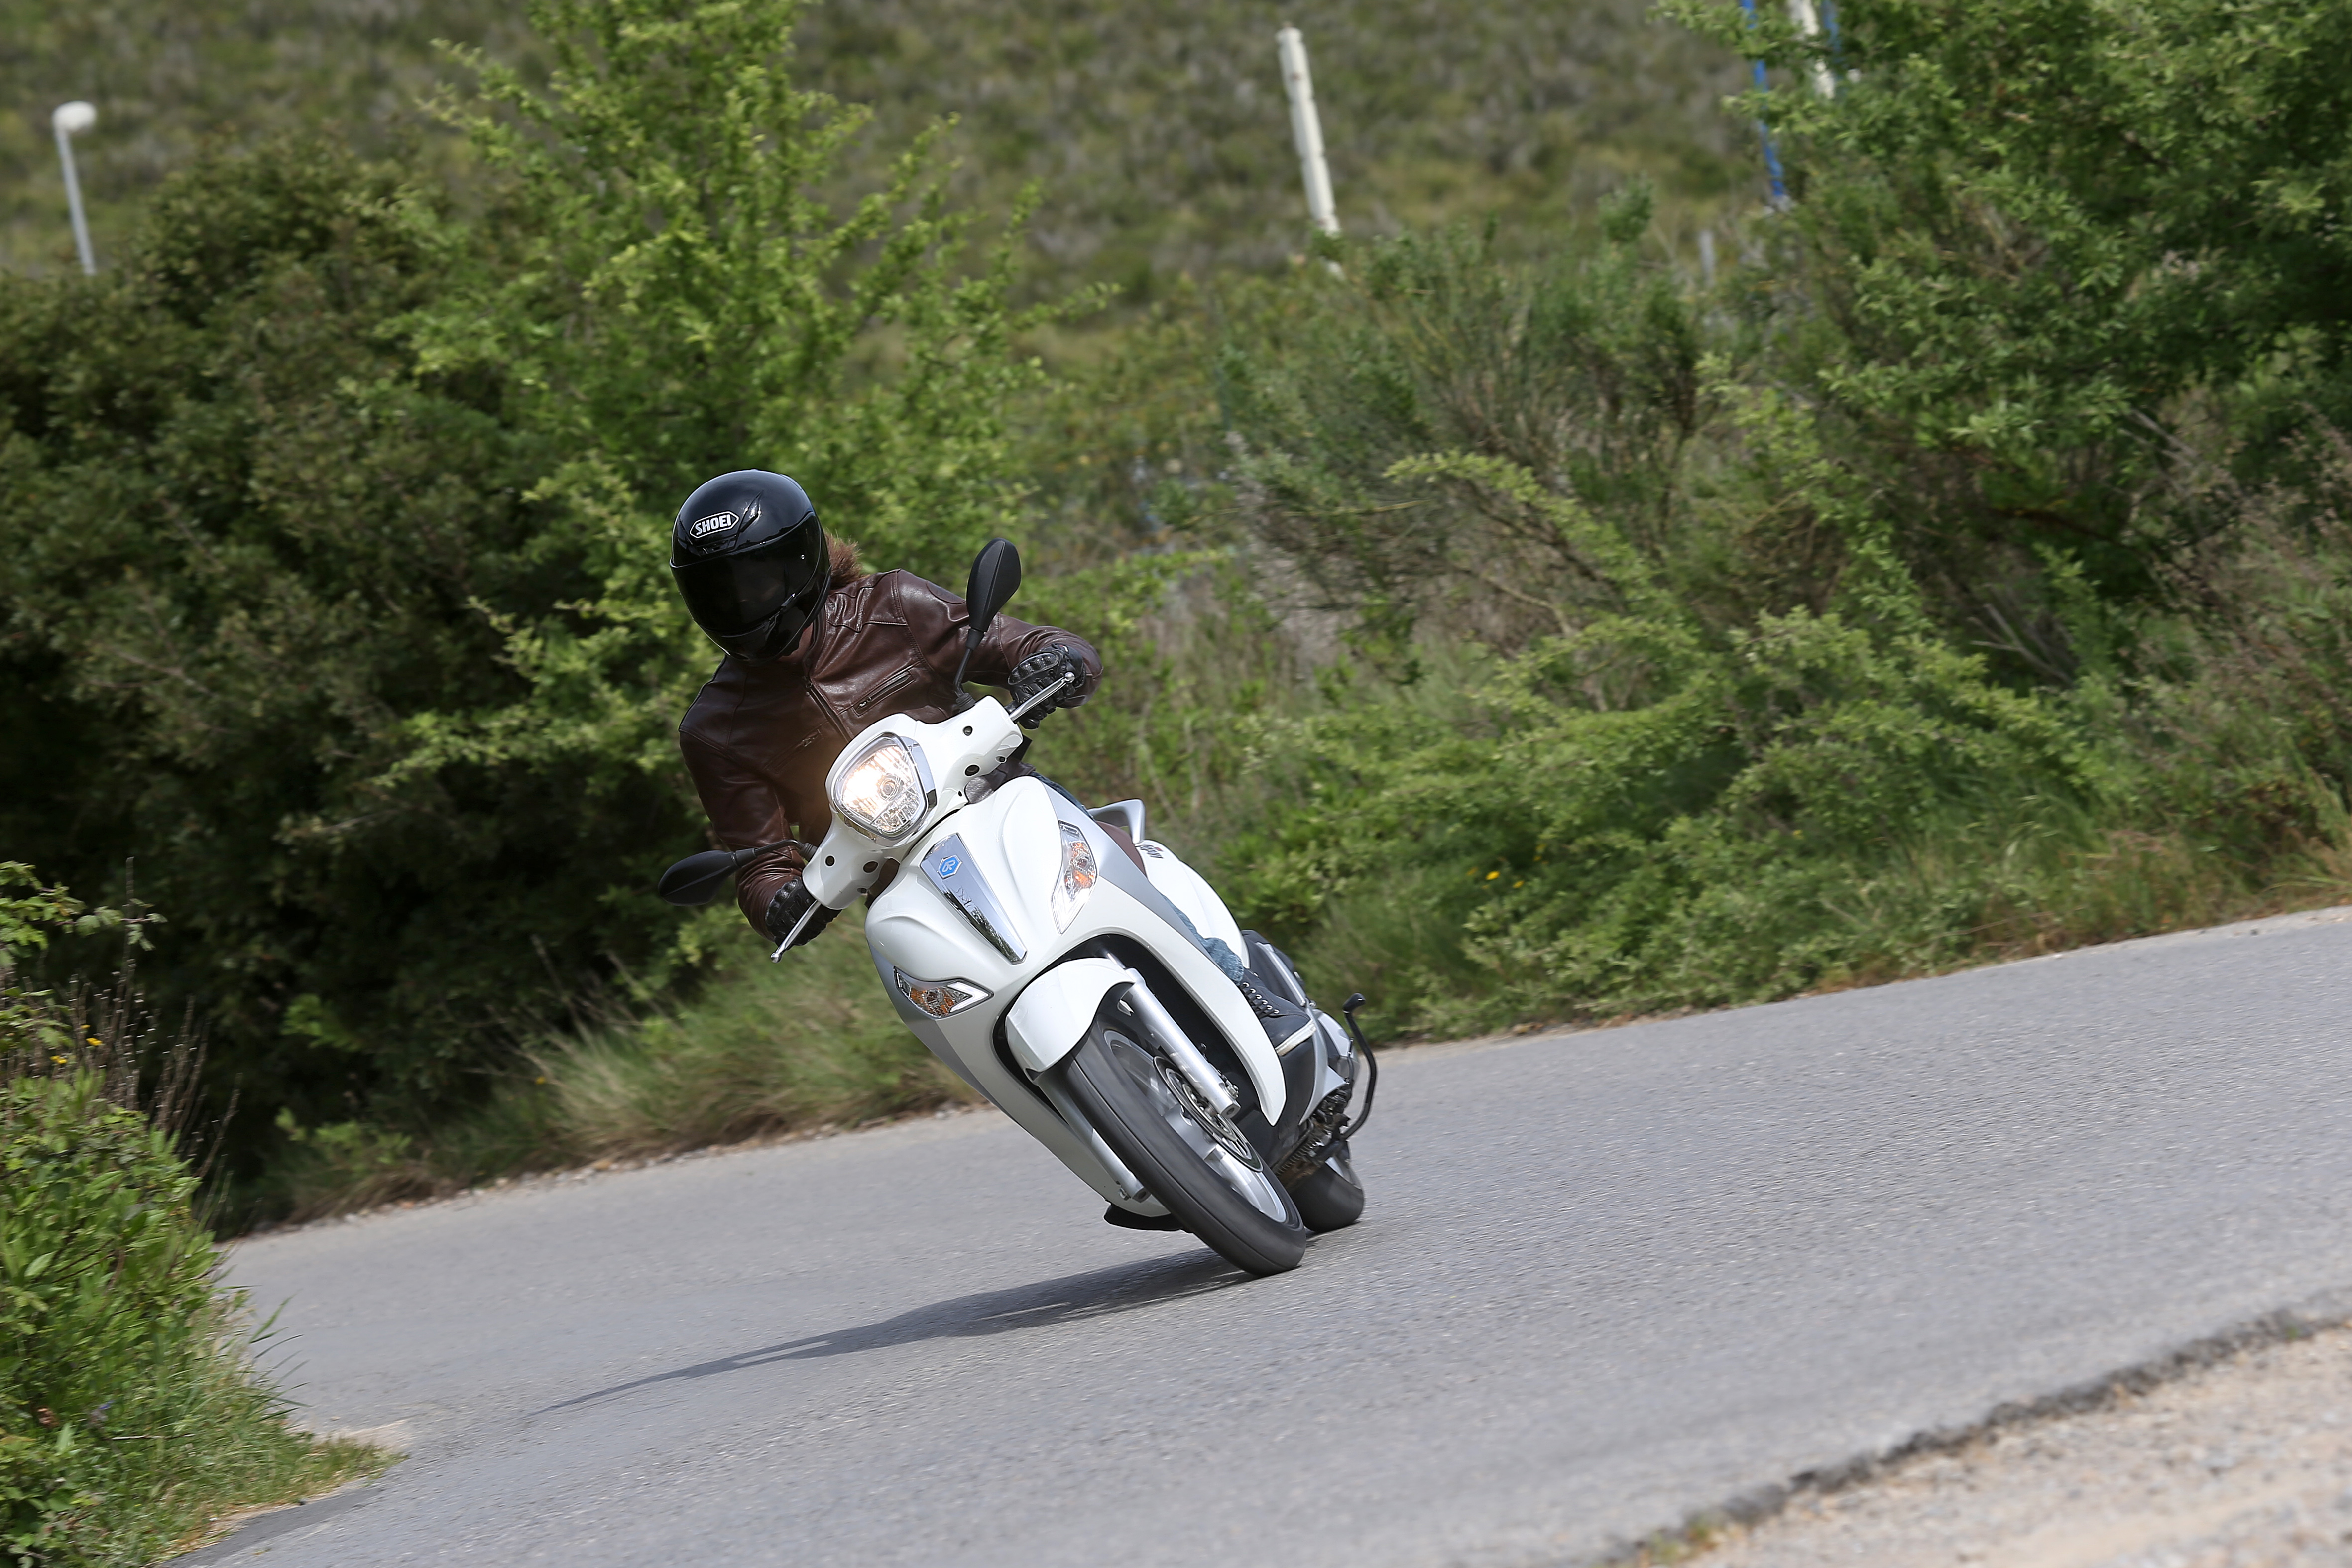 First ride: Piaggio Medley 125 review